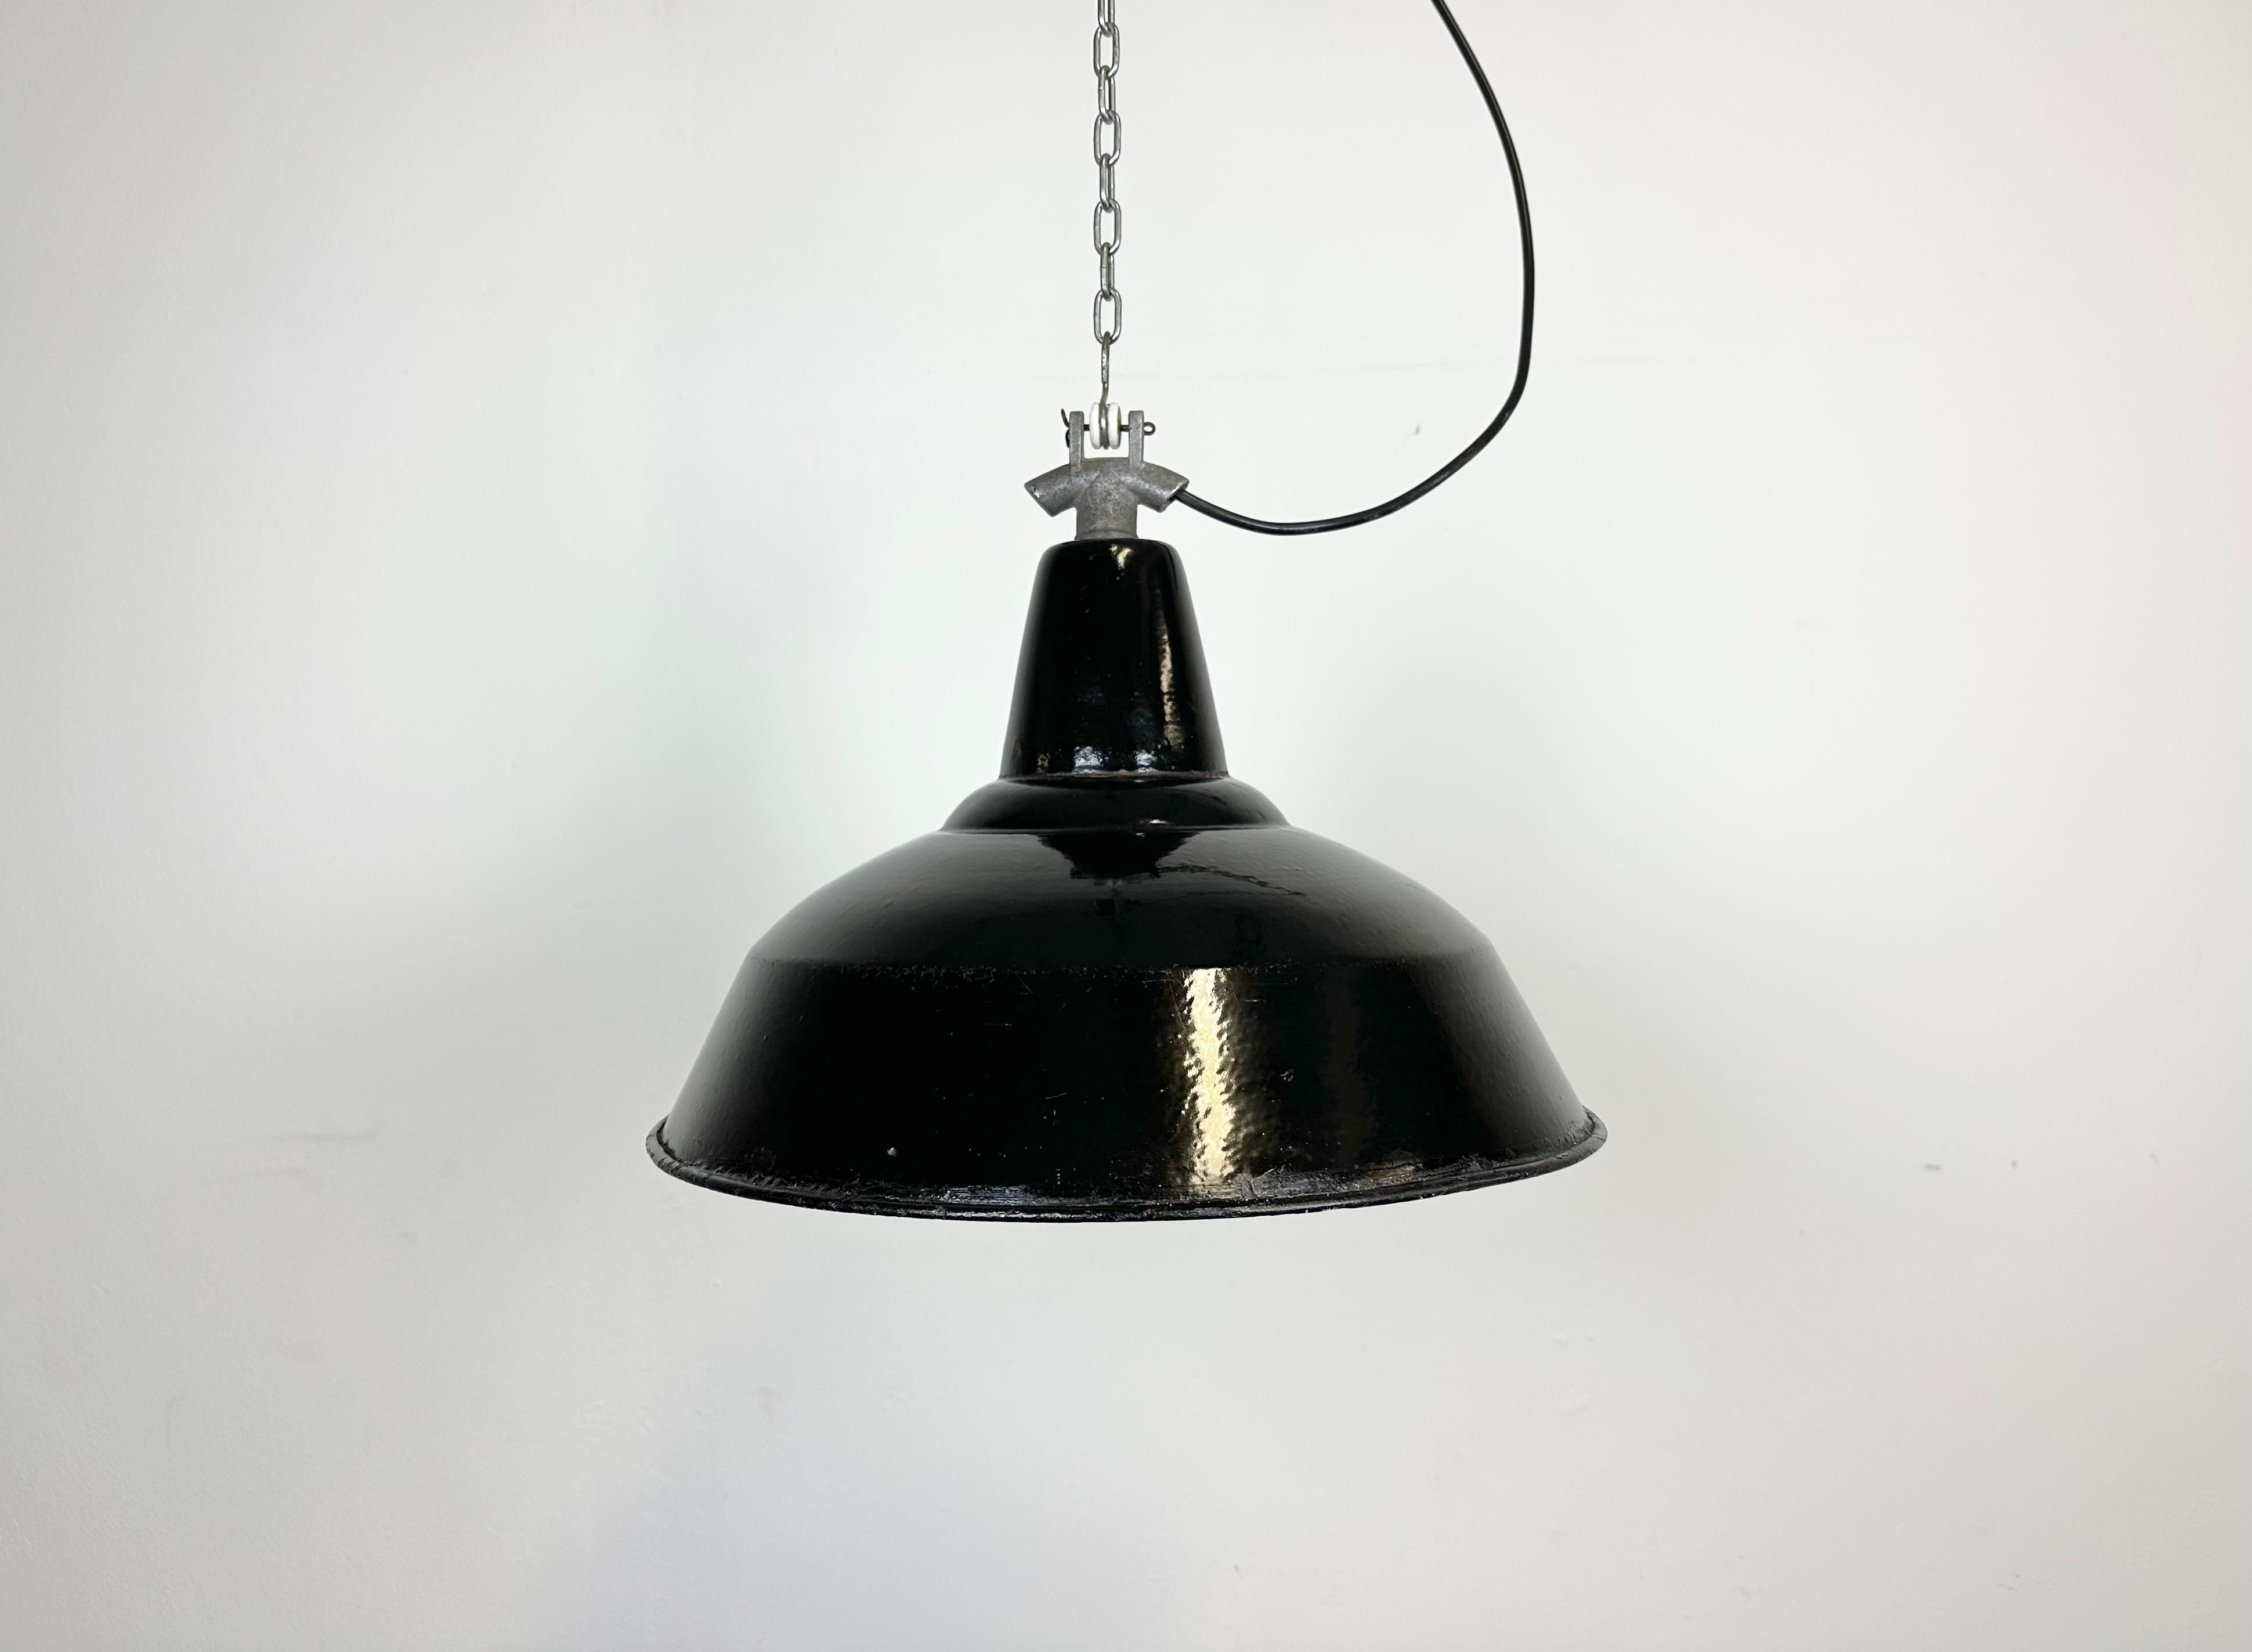 Industrial black enamel pendant light made in former Czechoslovakia during the 1960s. White enamel inside the shade. Cast iron top. The porcelain socket requires E 27/ E26 light bulbs. New wire. Fully functional. The weight of the lamp is 1 kg.